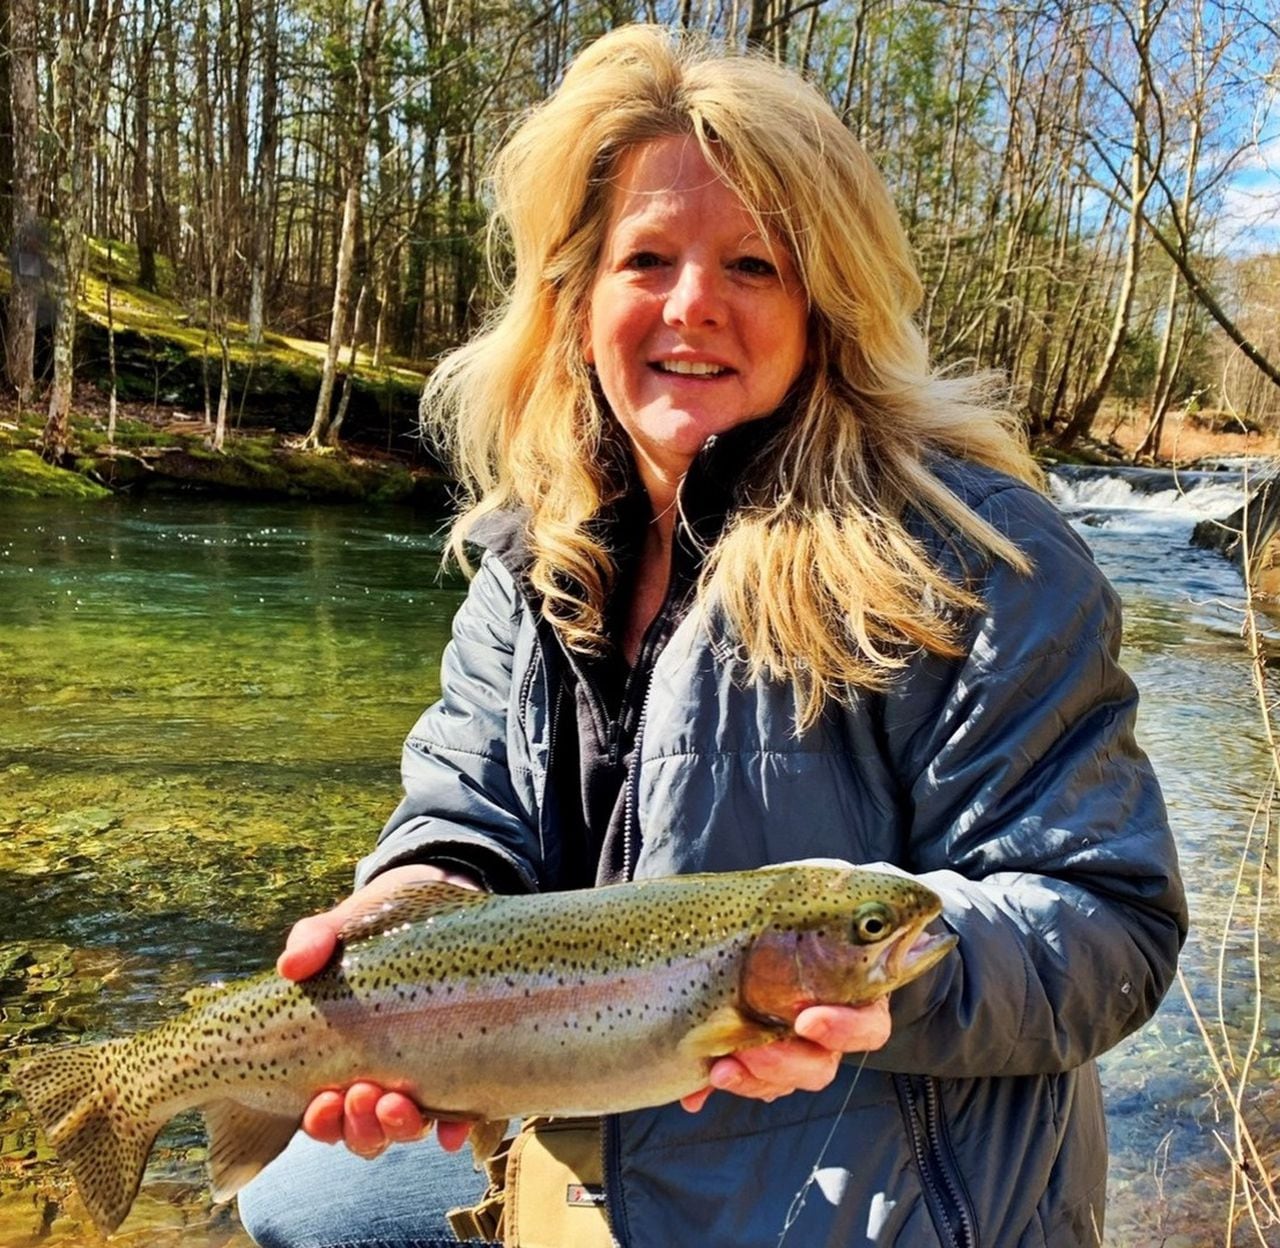 Trout Fishing Season Upstate Ny Anglers Share Photos Of Their Catches Newyorkupstate Com